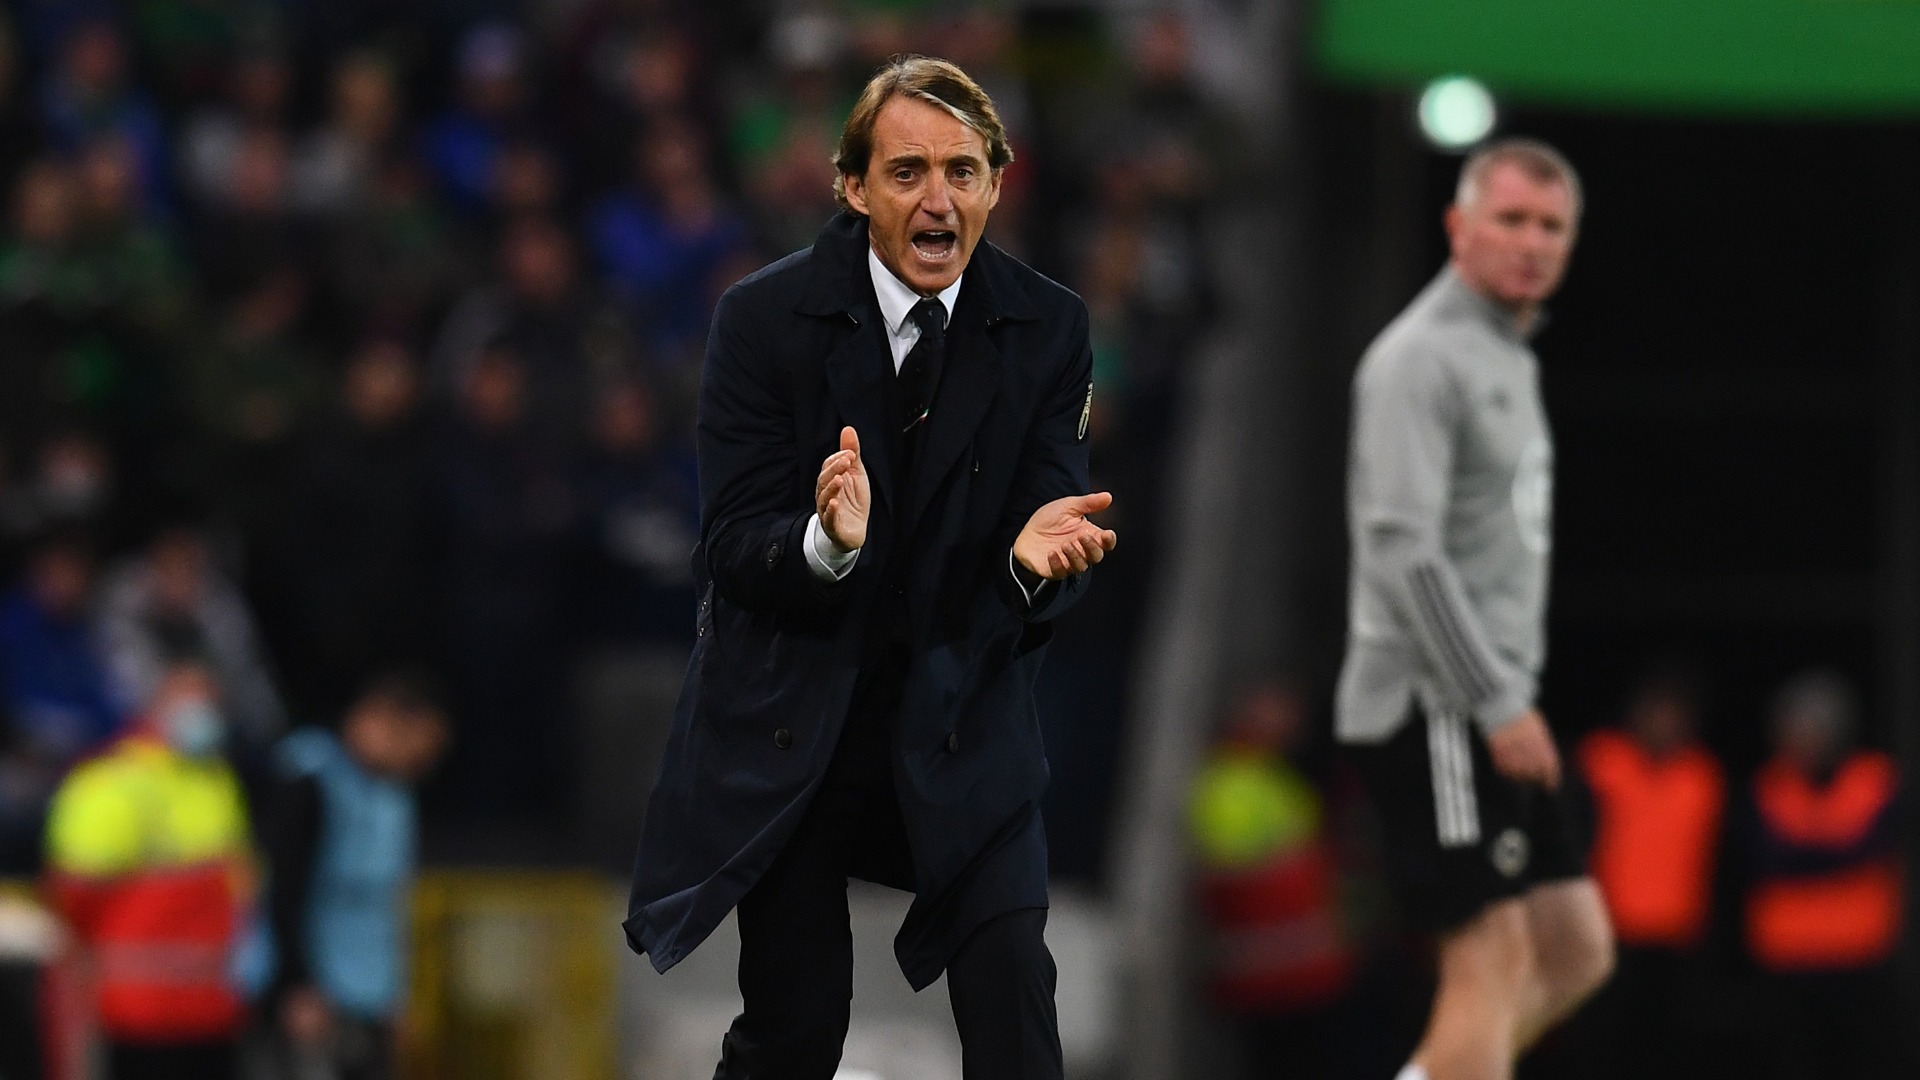 Mancini 'completely confident' Italy will qualify for World Cup via play-offs